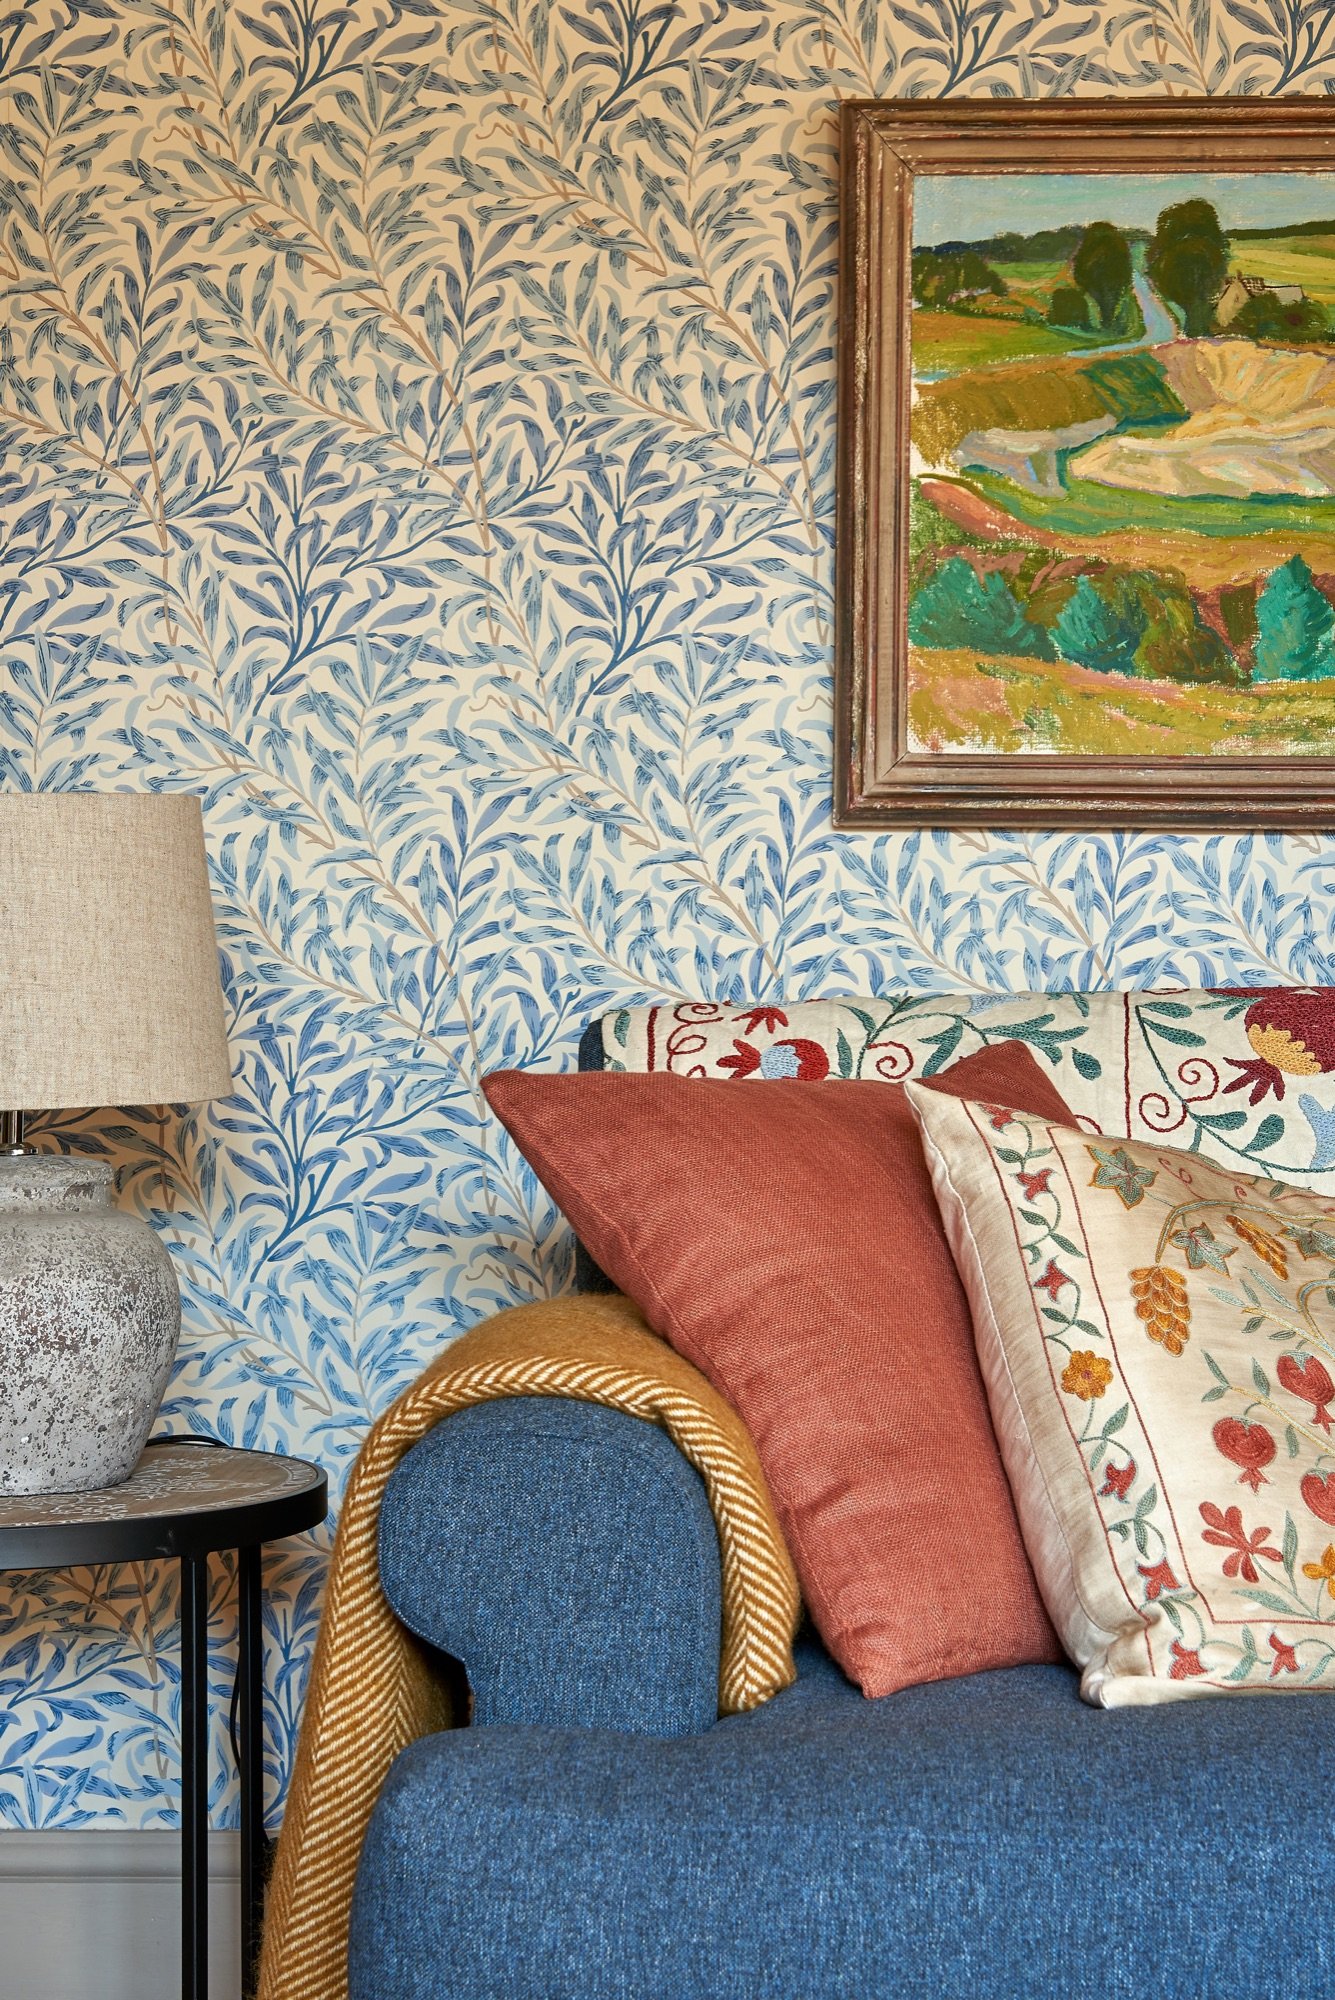 William Morris,vintage art,suzani,one.world,sofa.com,cotswold property,country living